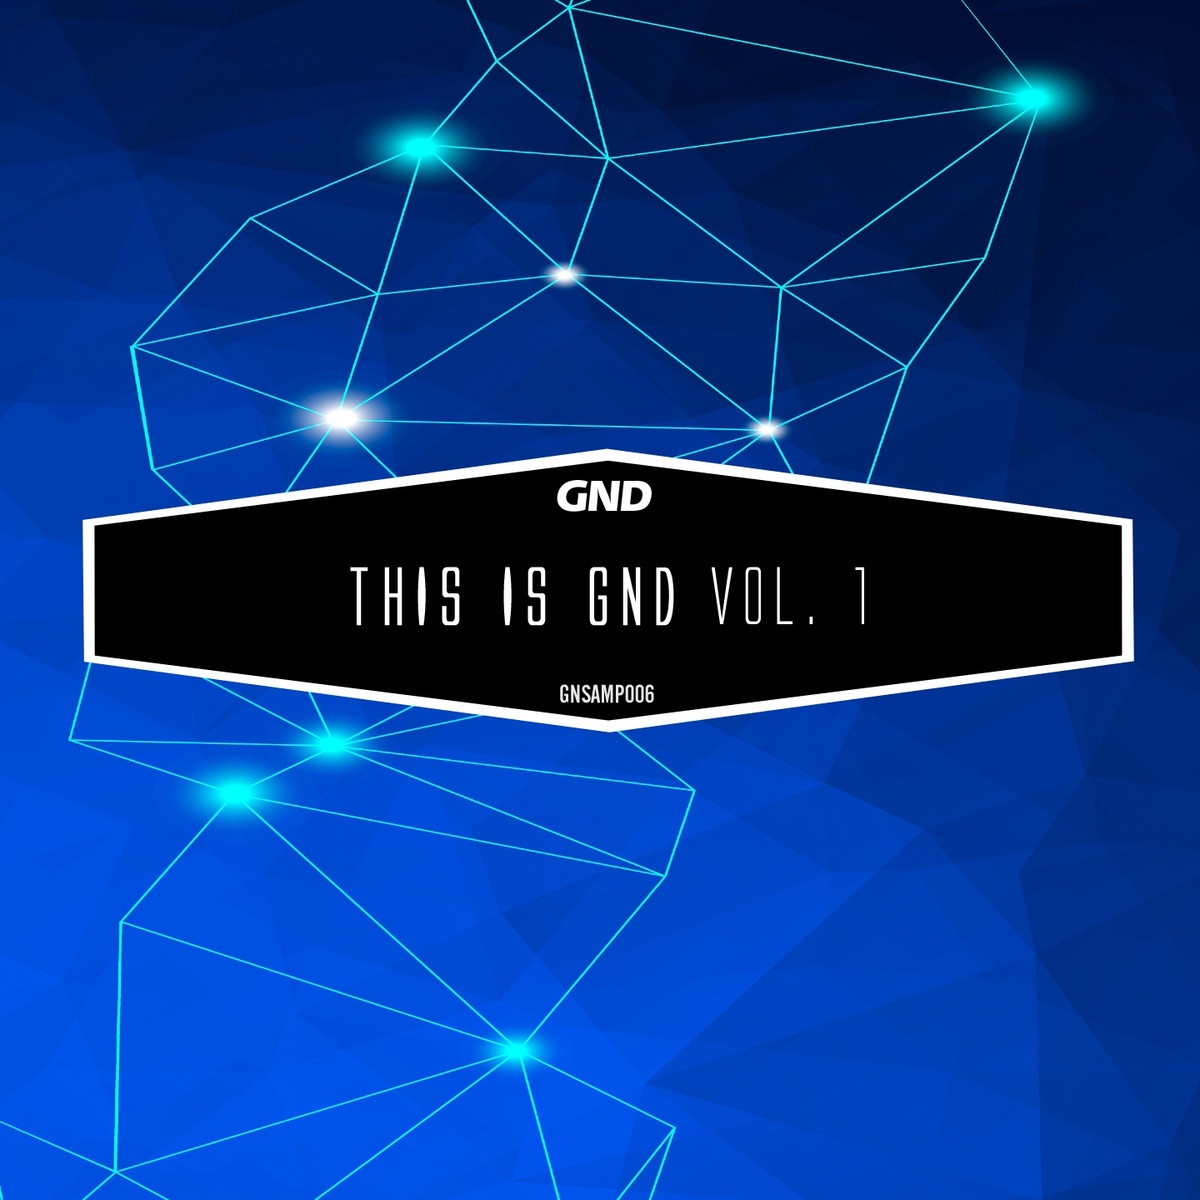 This is GND, Vol. 1